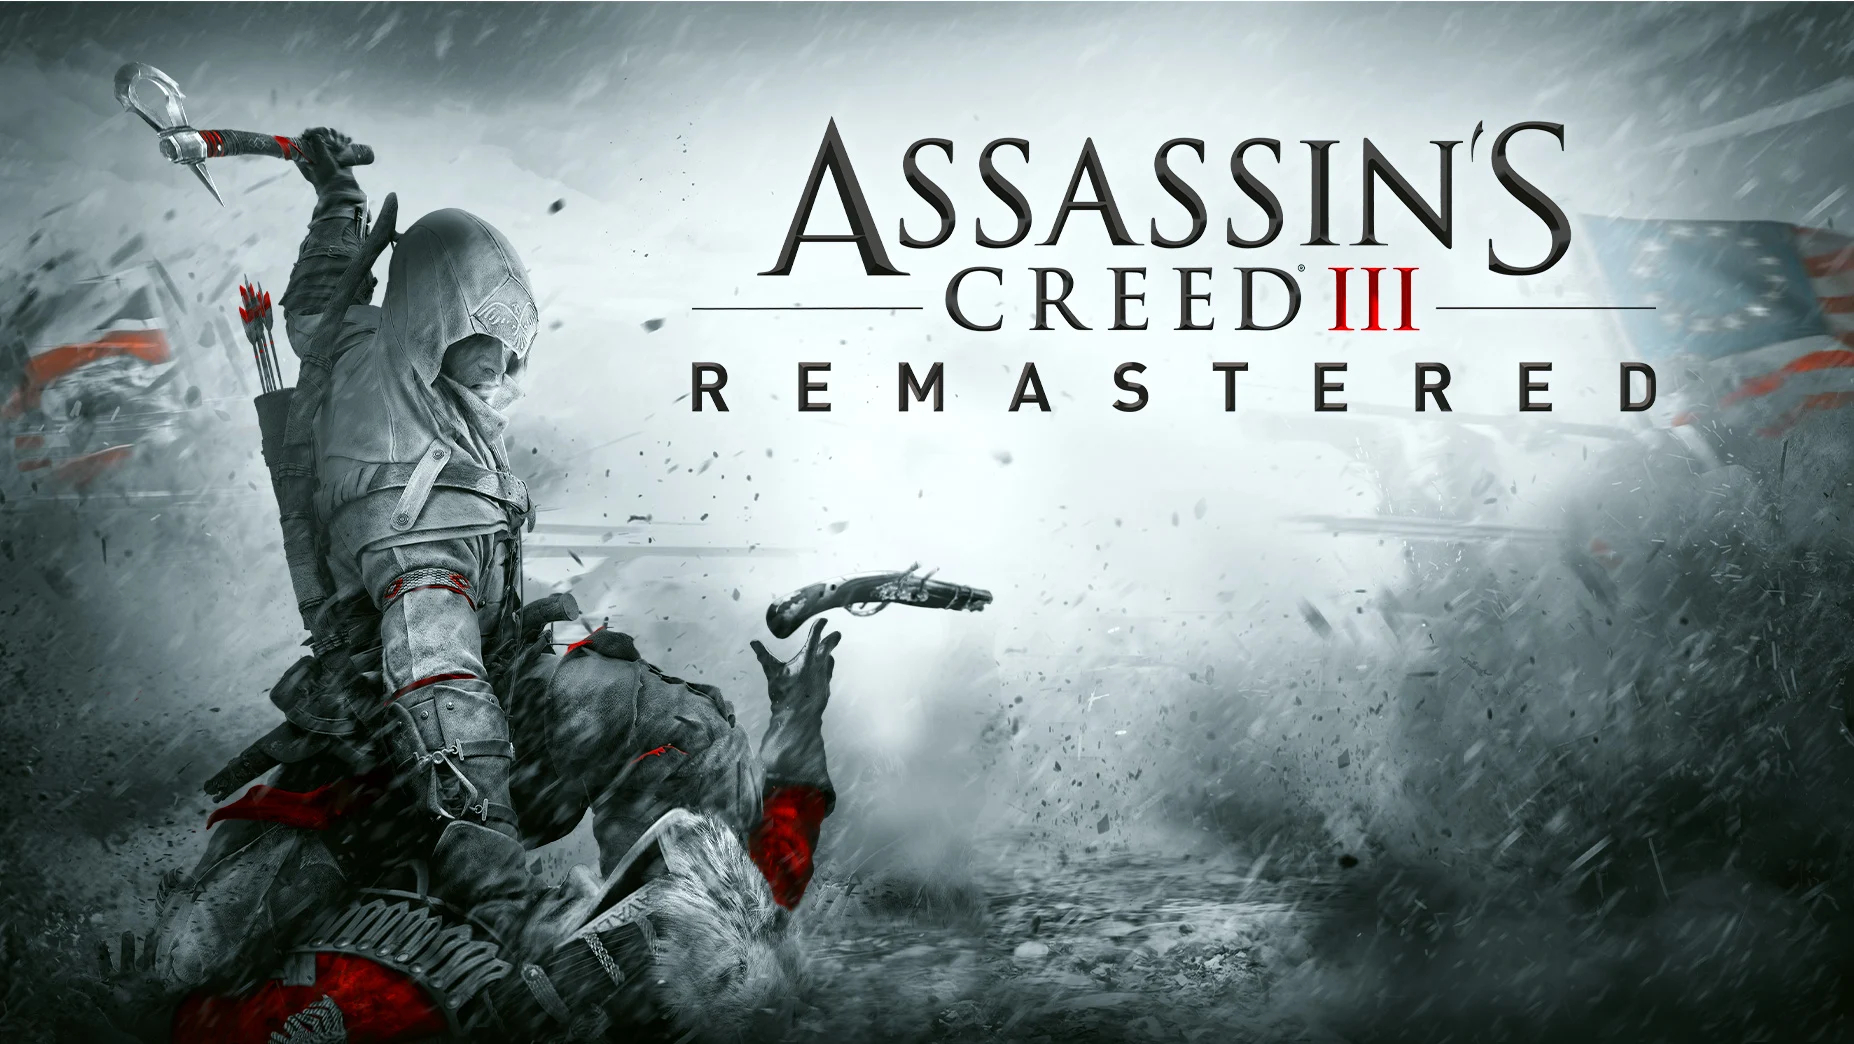 Assassin's Creed III Remastered Achievements